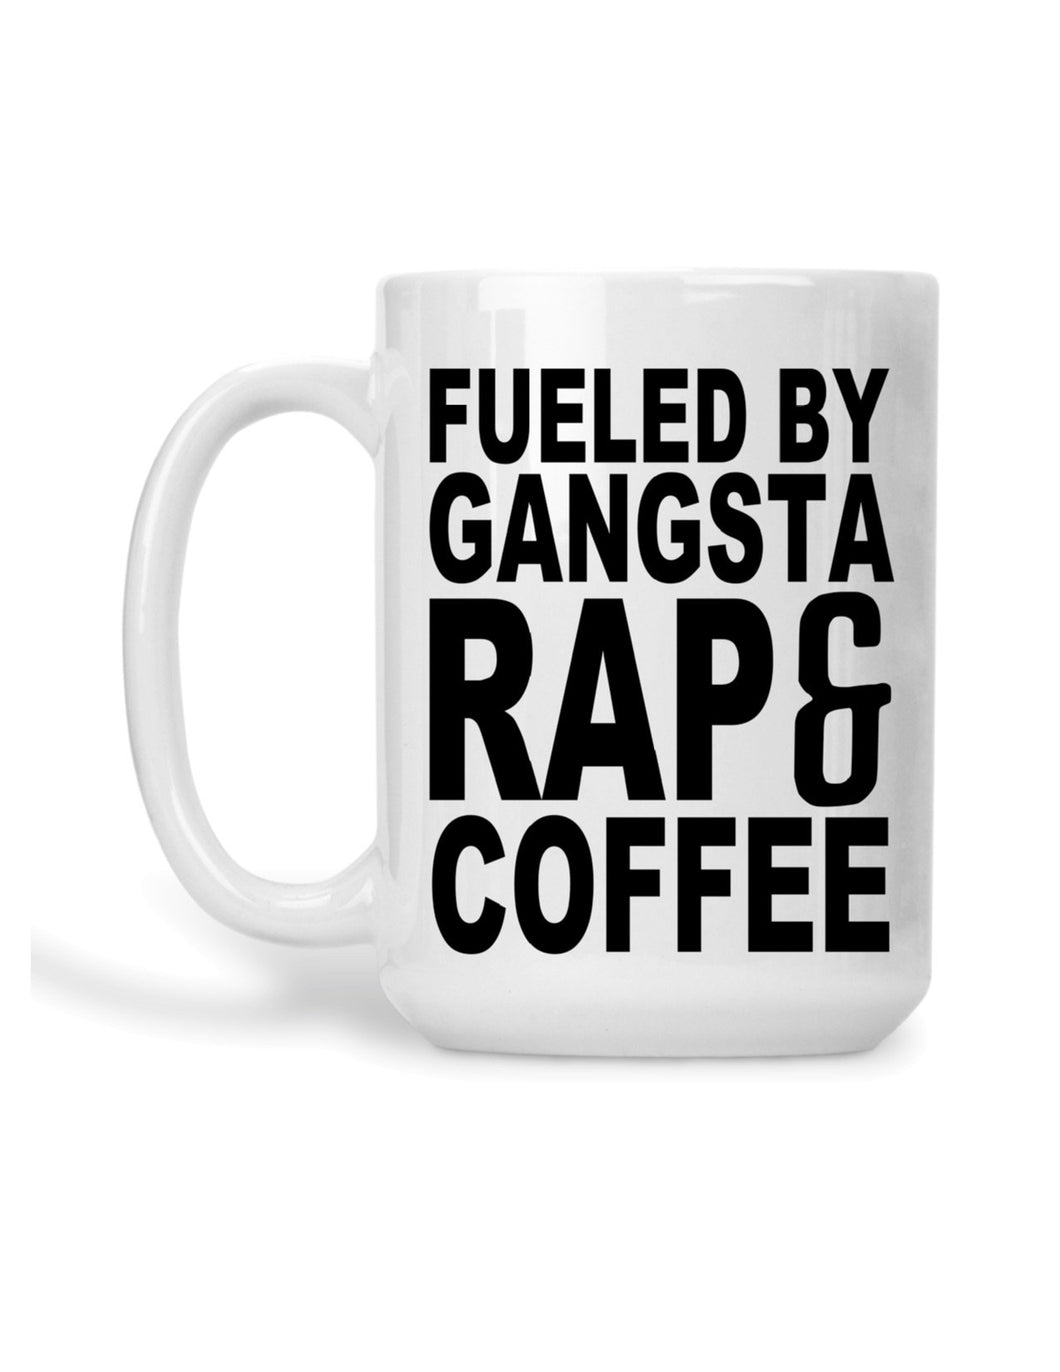 Fueled by gangsta rap and coffee